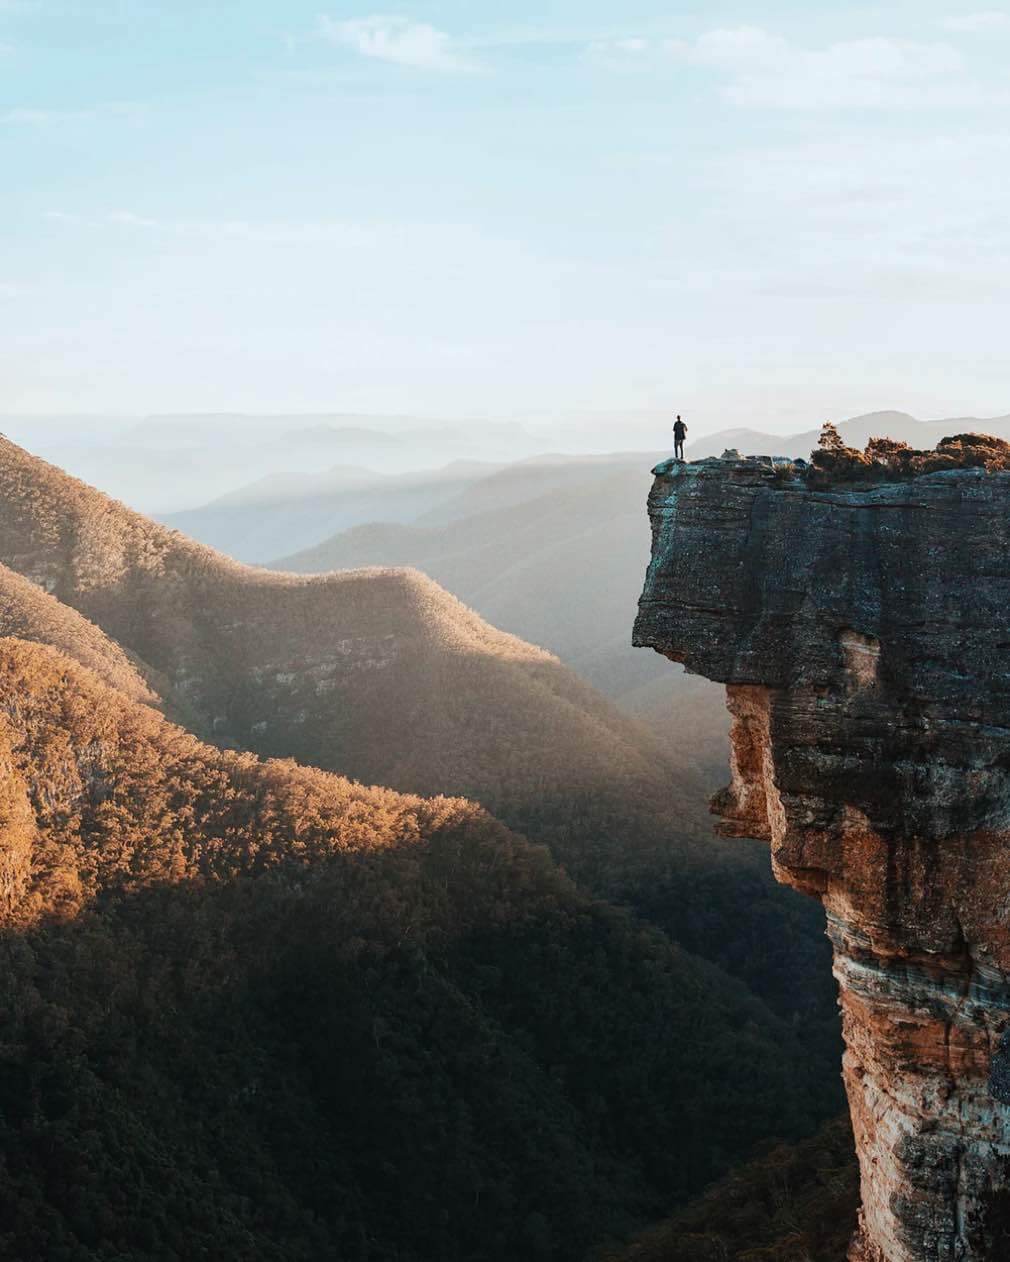 A silhouette perched on a cliff overlooking the hinterland